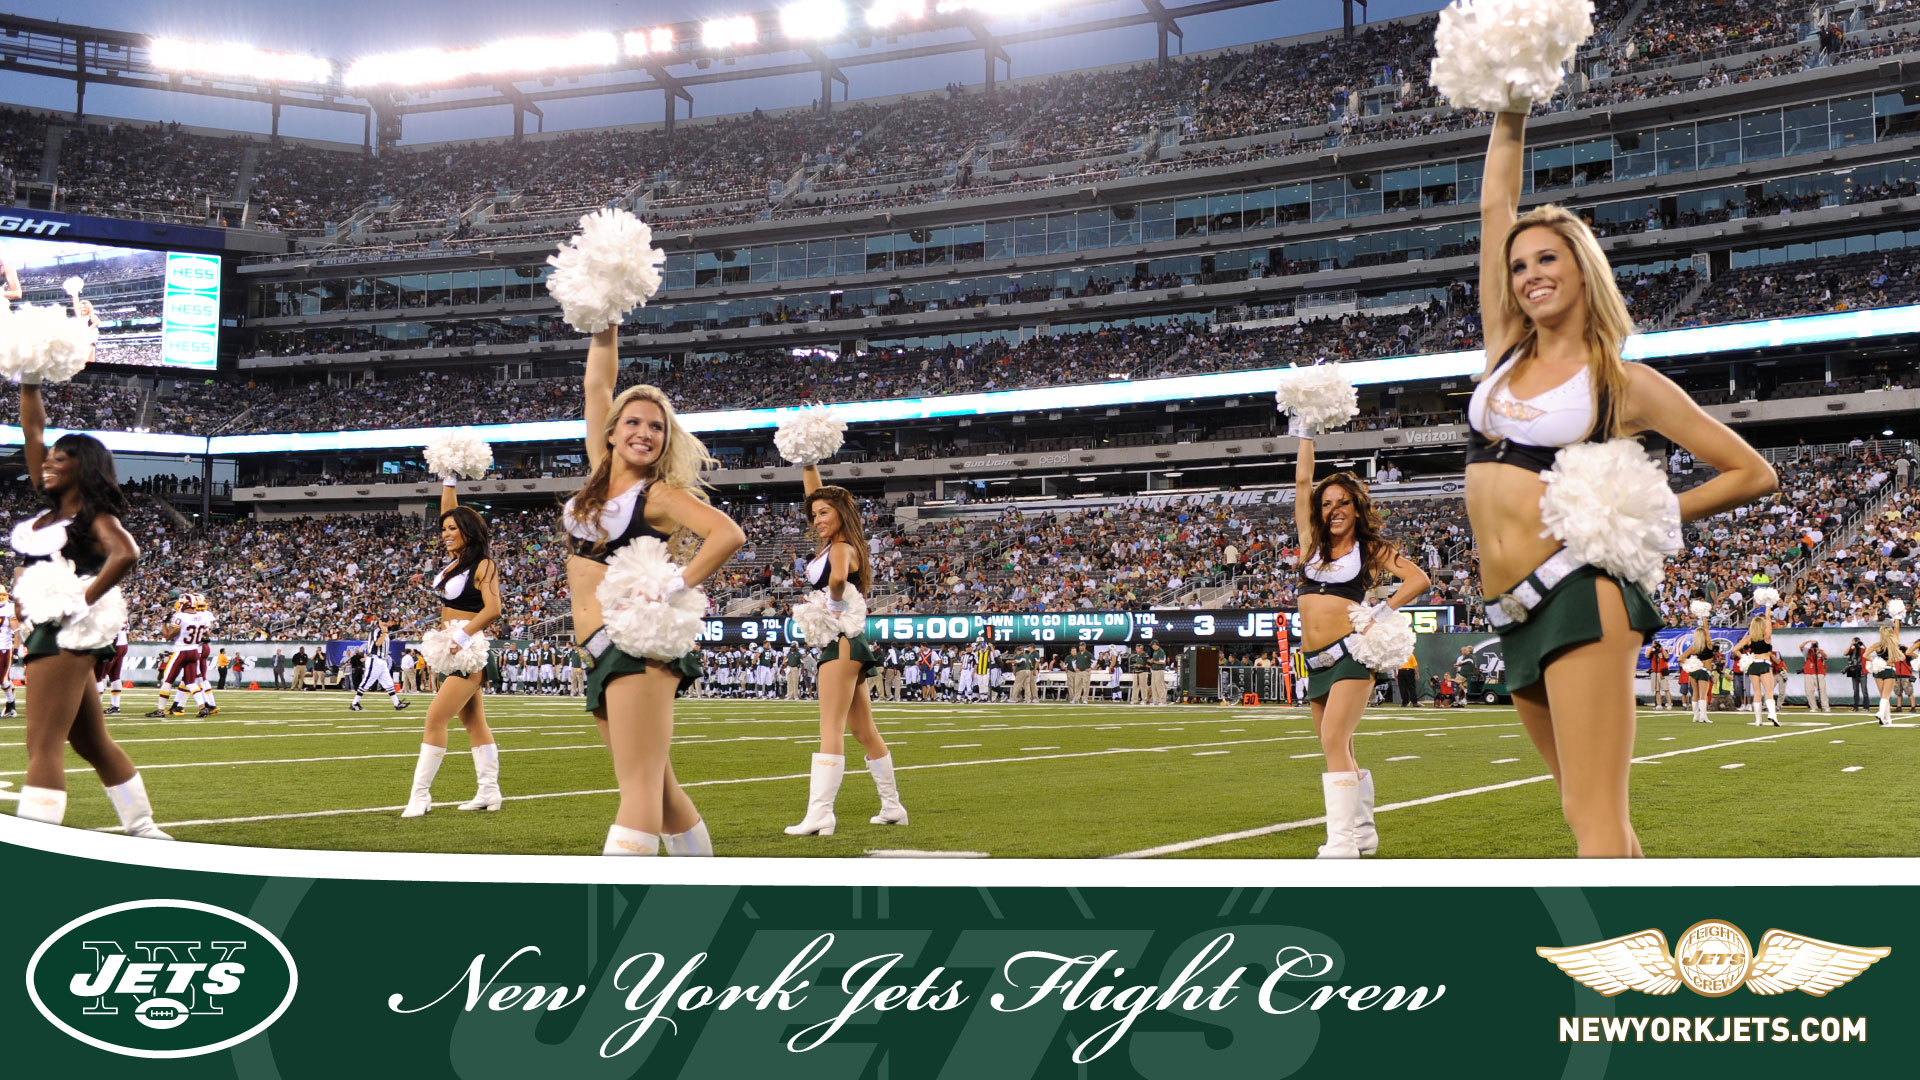 Outstanding New York Jets wallpaper New York Jets wallpapers